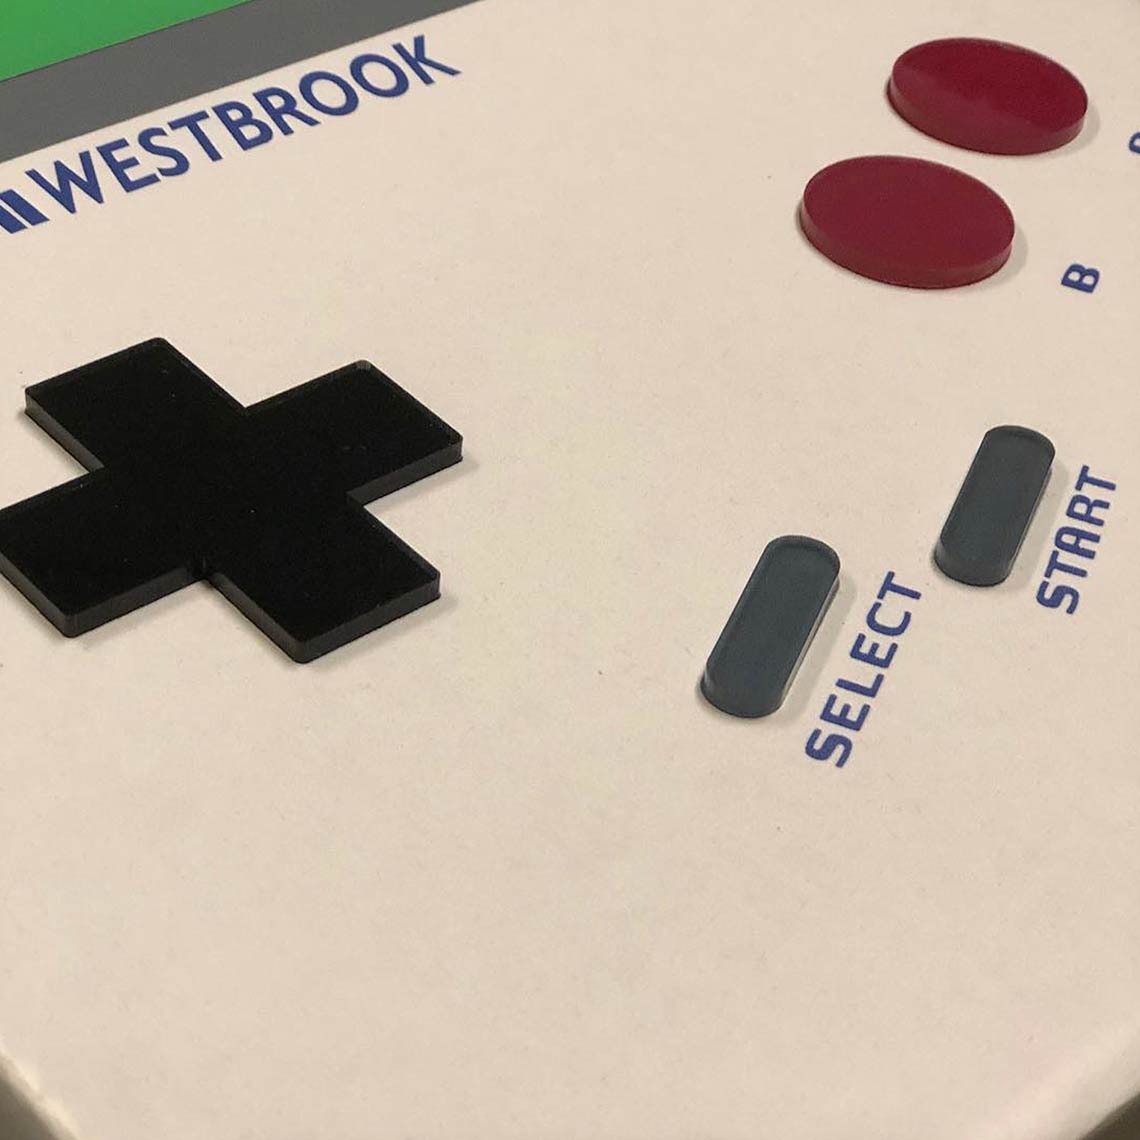 Westbrook Logo - Russell Westbrook Now Has a Game Boy-Themed Jordan Why Not Zer0.2